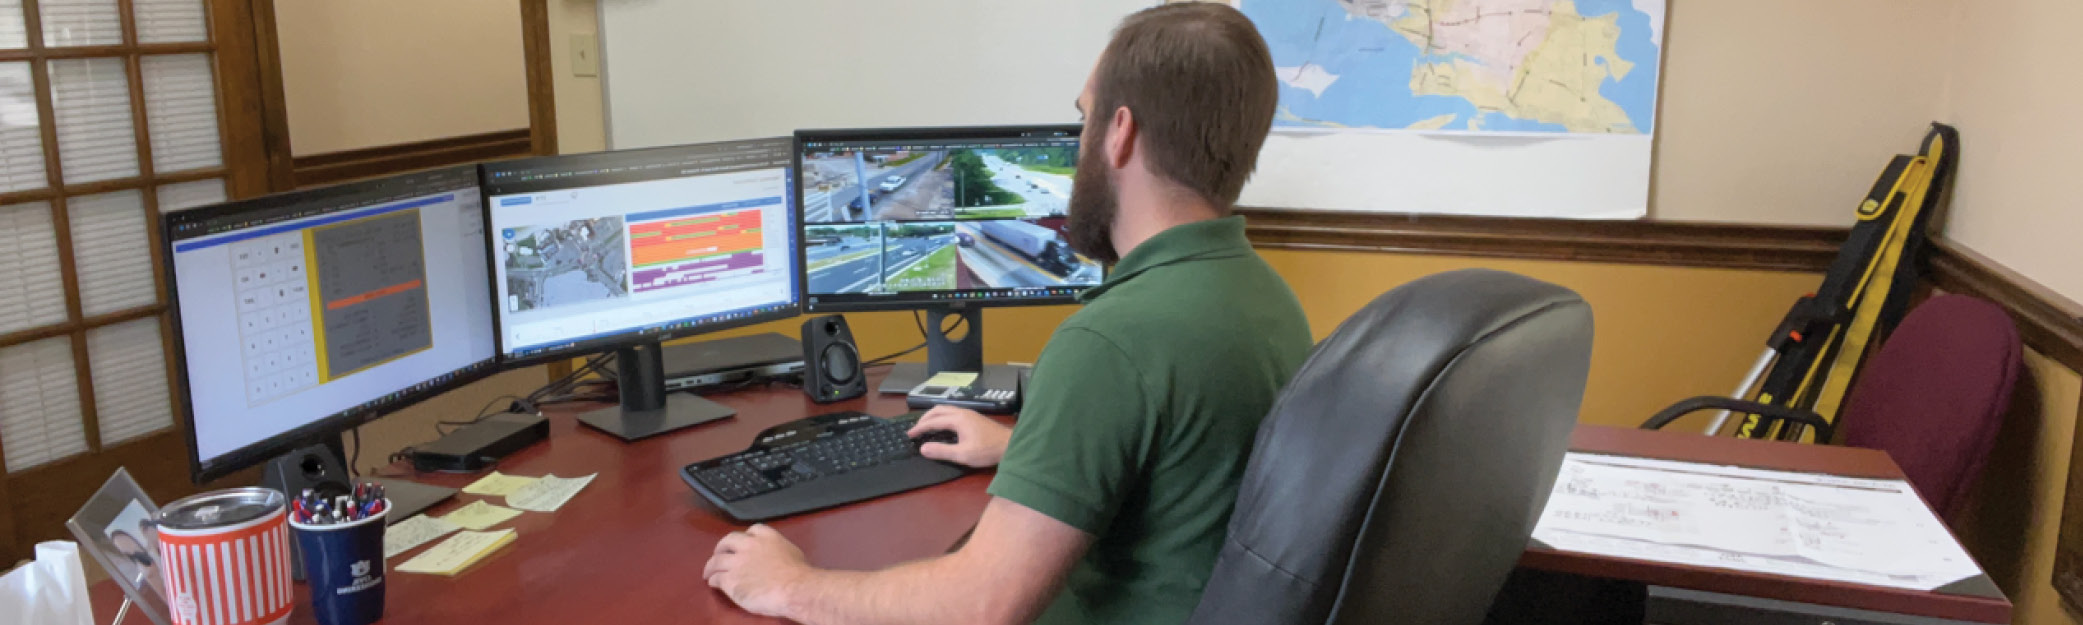 DRMP's Signalization Expertise Drives Traffic Safety in Florida's Panhandle 